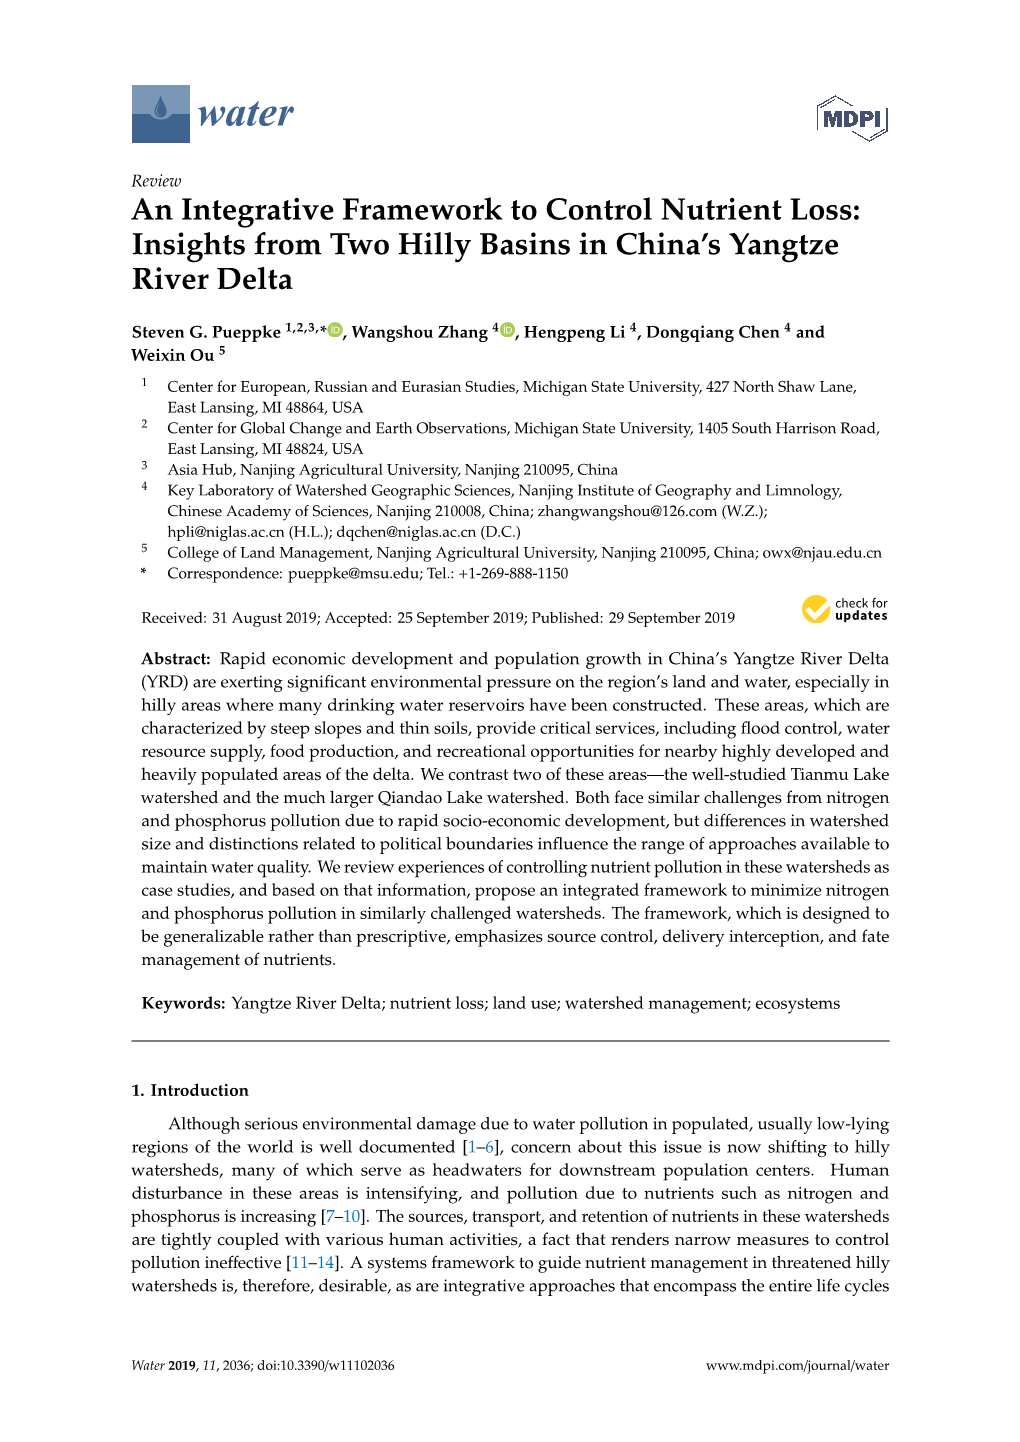 An Integrative Framework to Control Nutrient Loss: Insights from Two Hilly Basins in China’S Yangtze River Delta